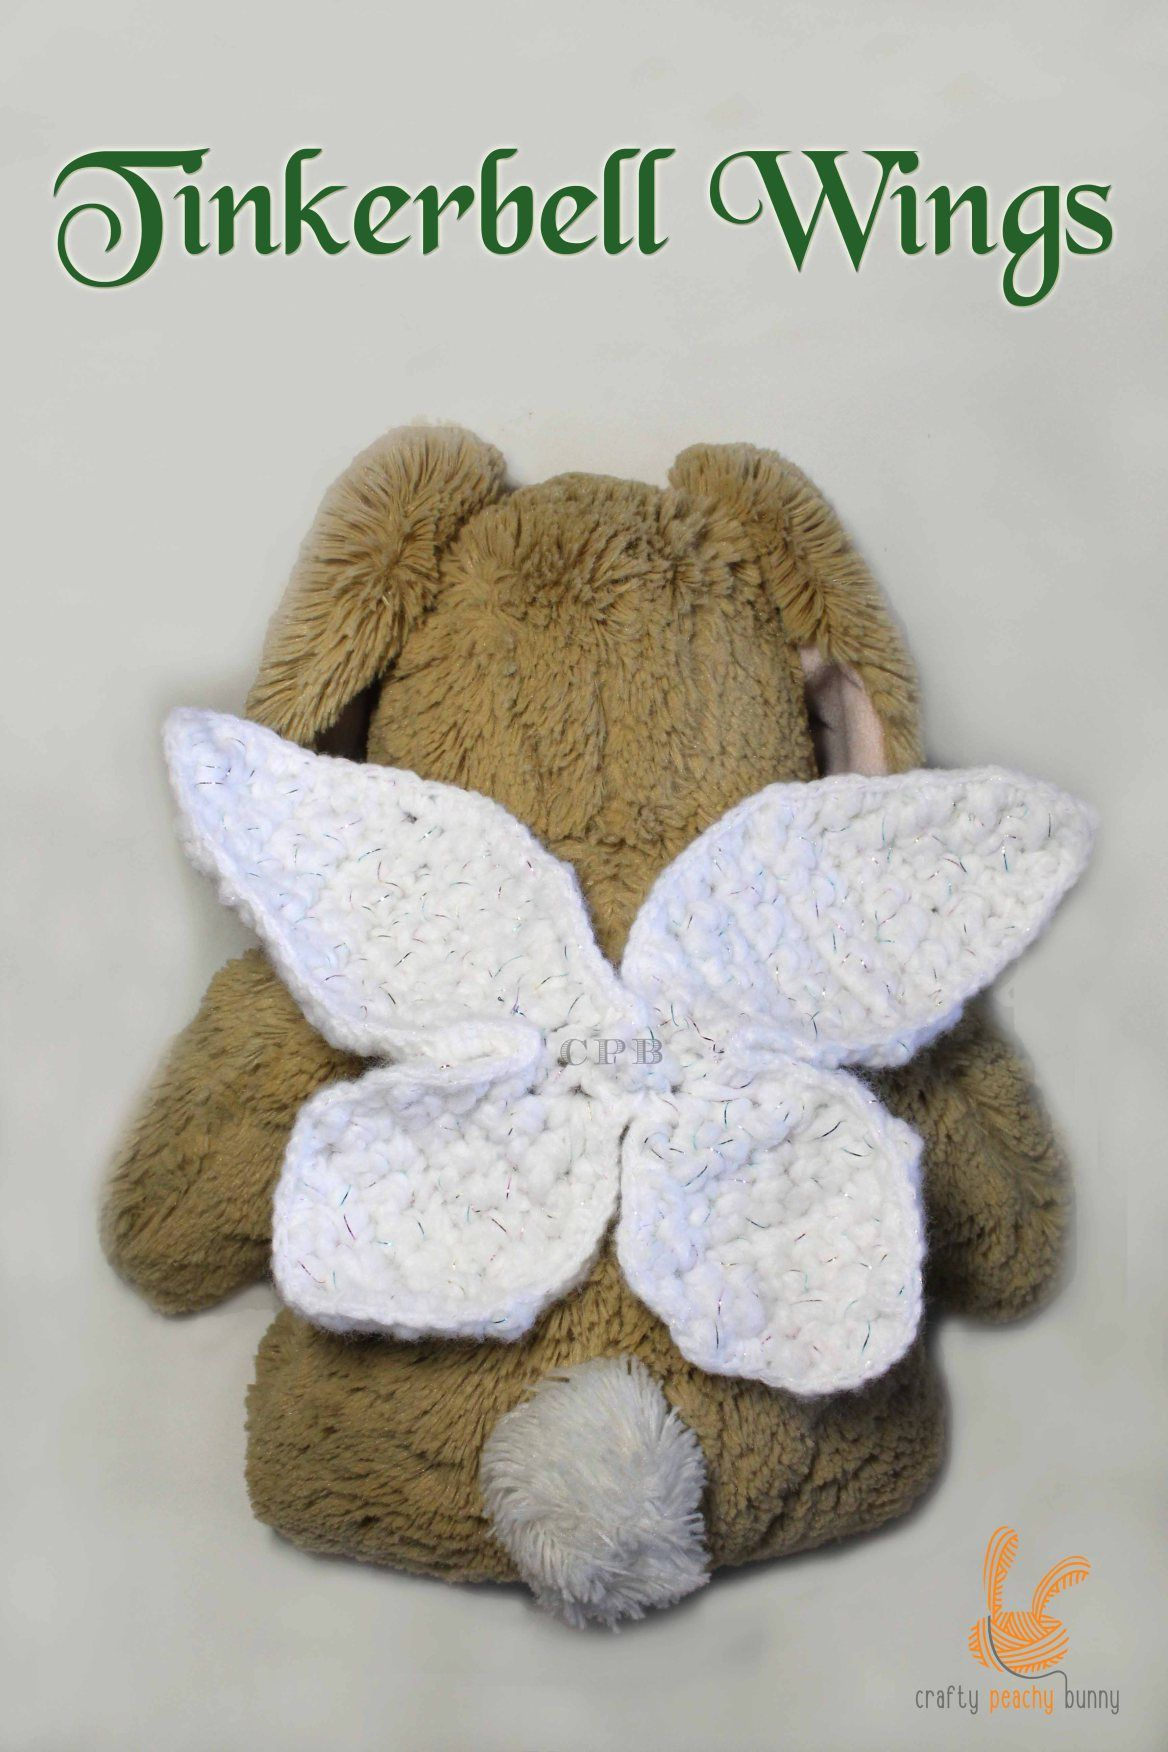 Wing Crochet Pattern Tinkerbell Wing Crafty Peachy Bunny Pinterest Tinkerbell Wings